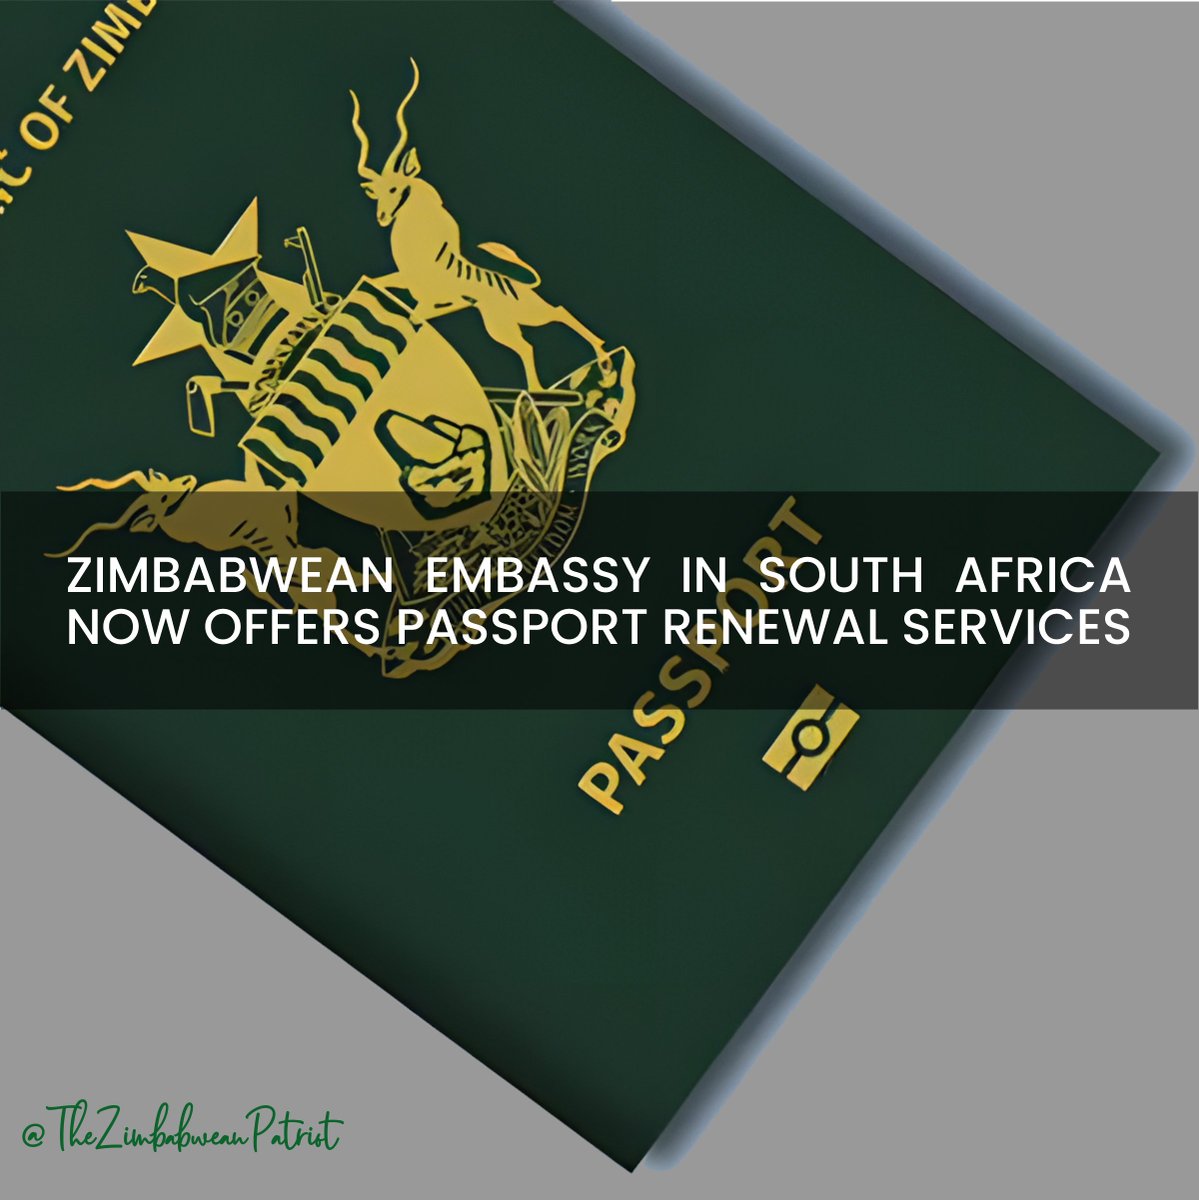 Zimbabweans in South Africa, you can now renew your passports at the Zimbabwean Embassy! No more long trips back to Zim, no more hassle! #ZimbabweanEmbassy #PassportRenewal #EDWorks